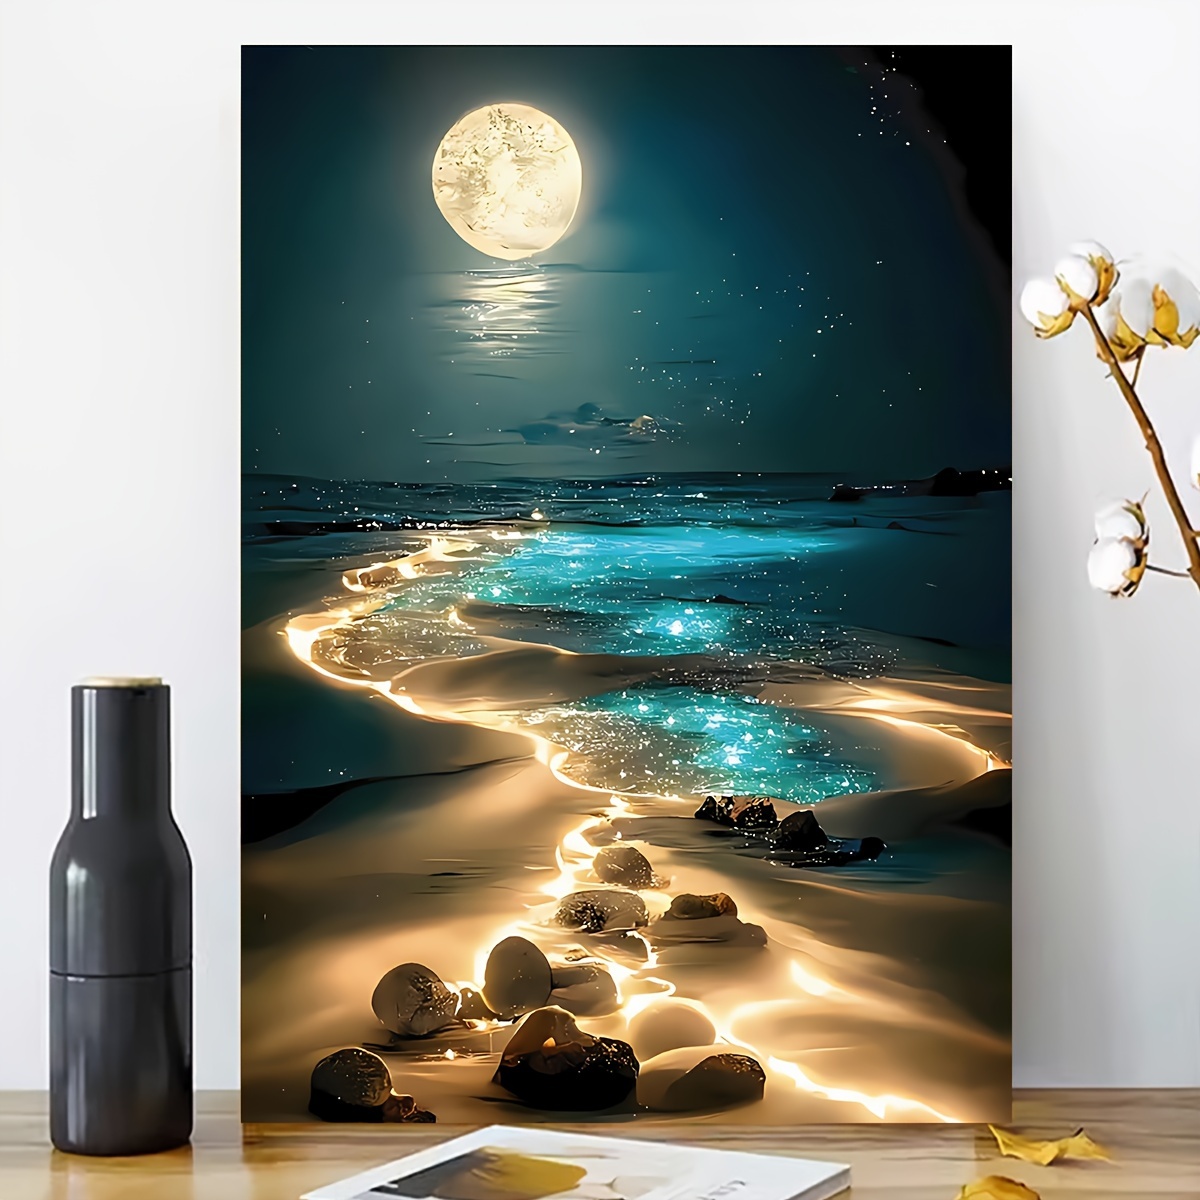 

10.98*7.67 Inches, "moon On The Beach", Difficult Irregular Animal-shaped Wooden Puzzle For Adults, Valentine's Day And Teacher's Day Birthday Gift During The Back-to-school Season